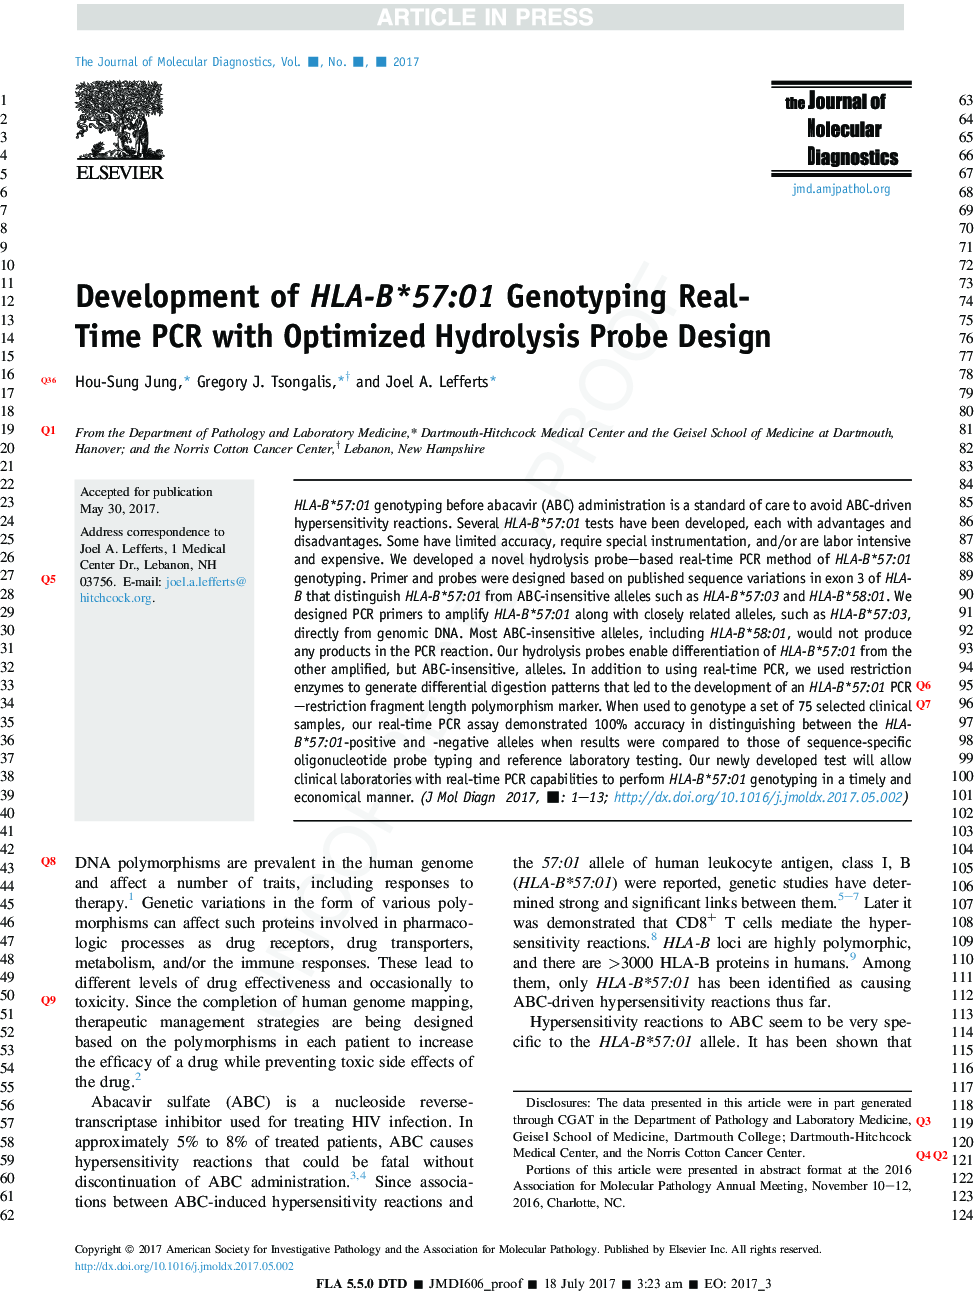 Development of HLA-B*57:01 Genotyping Real-Time PCR with Optimized Hydrolysis Probe Design